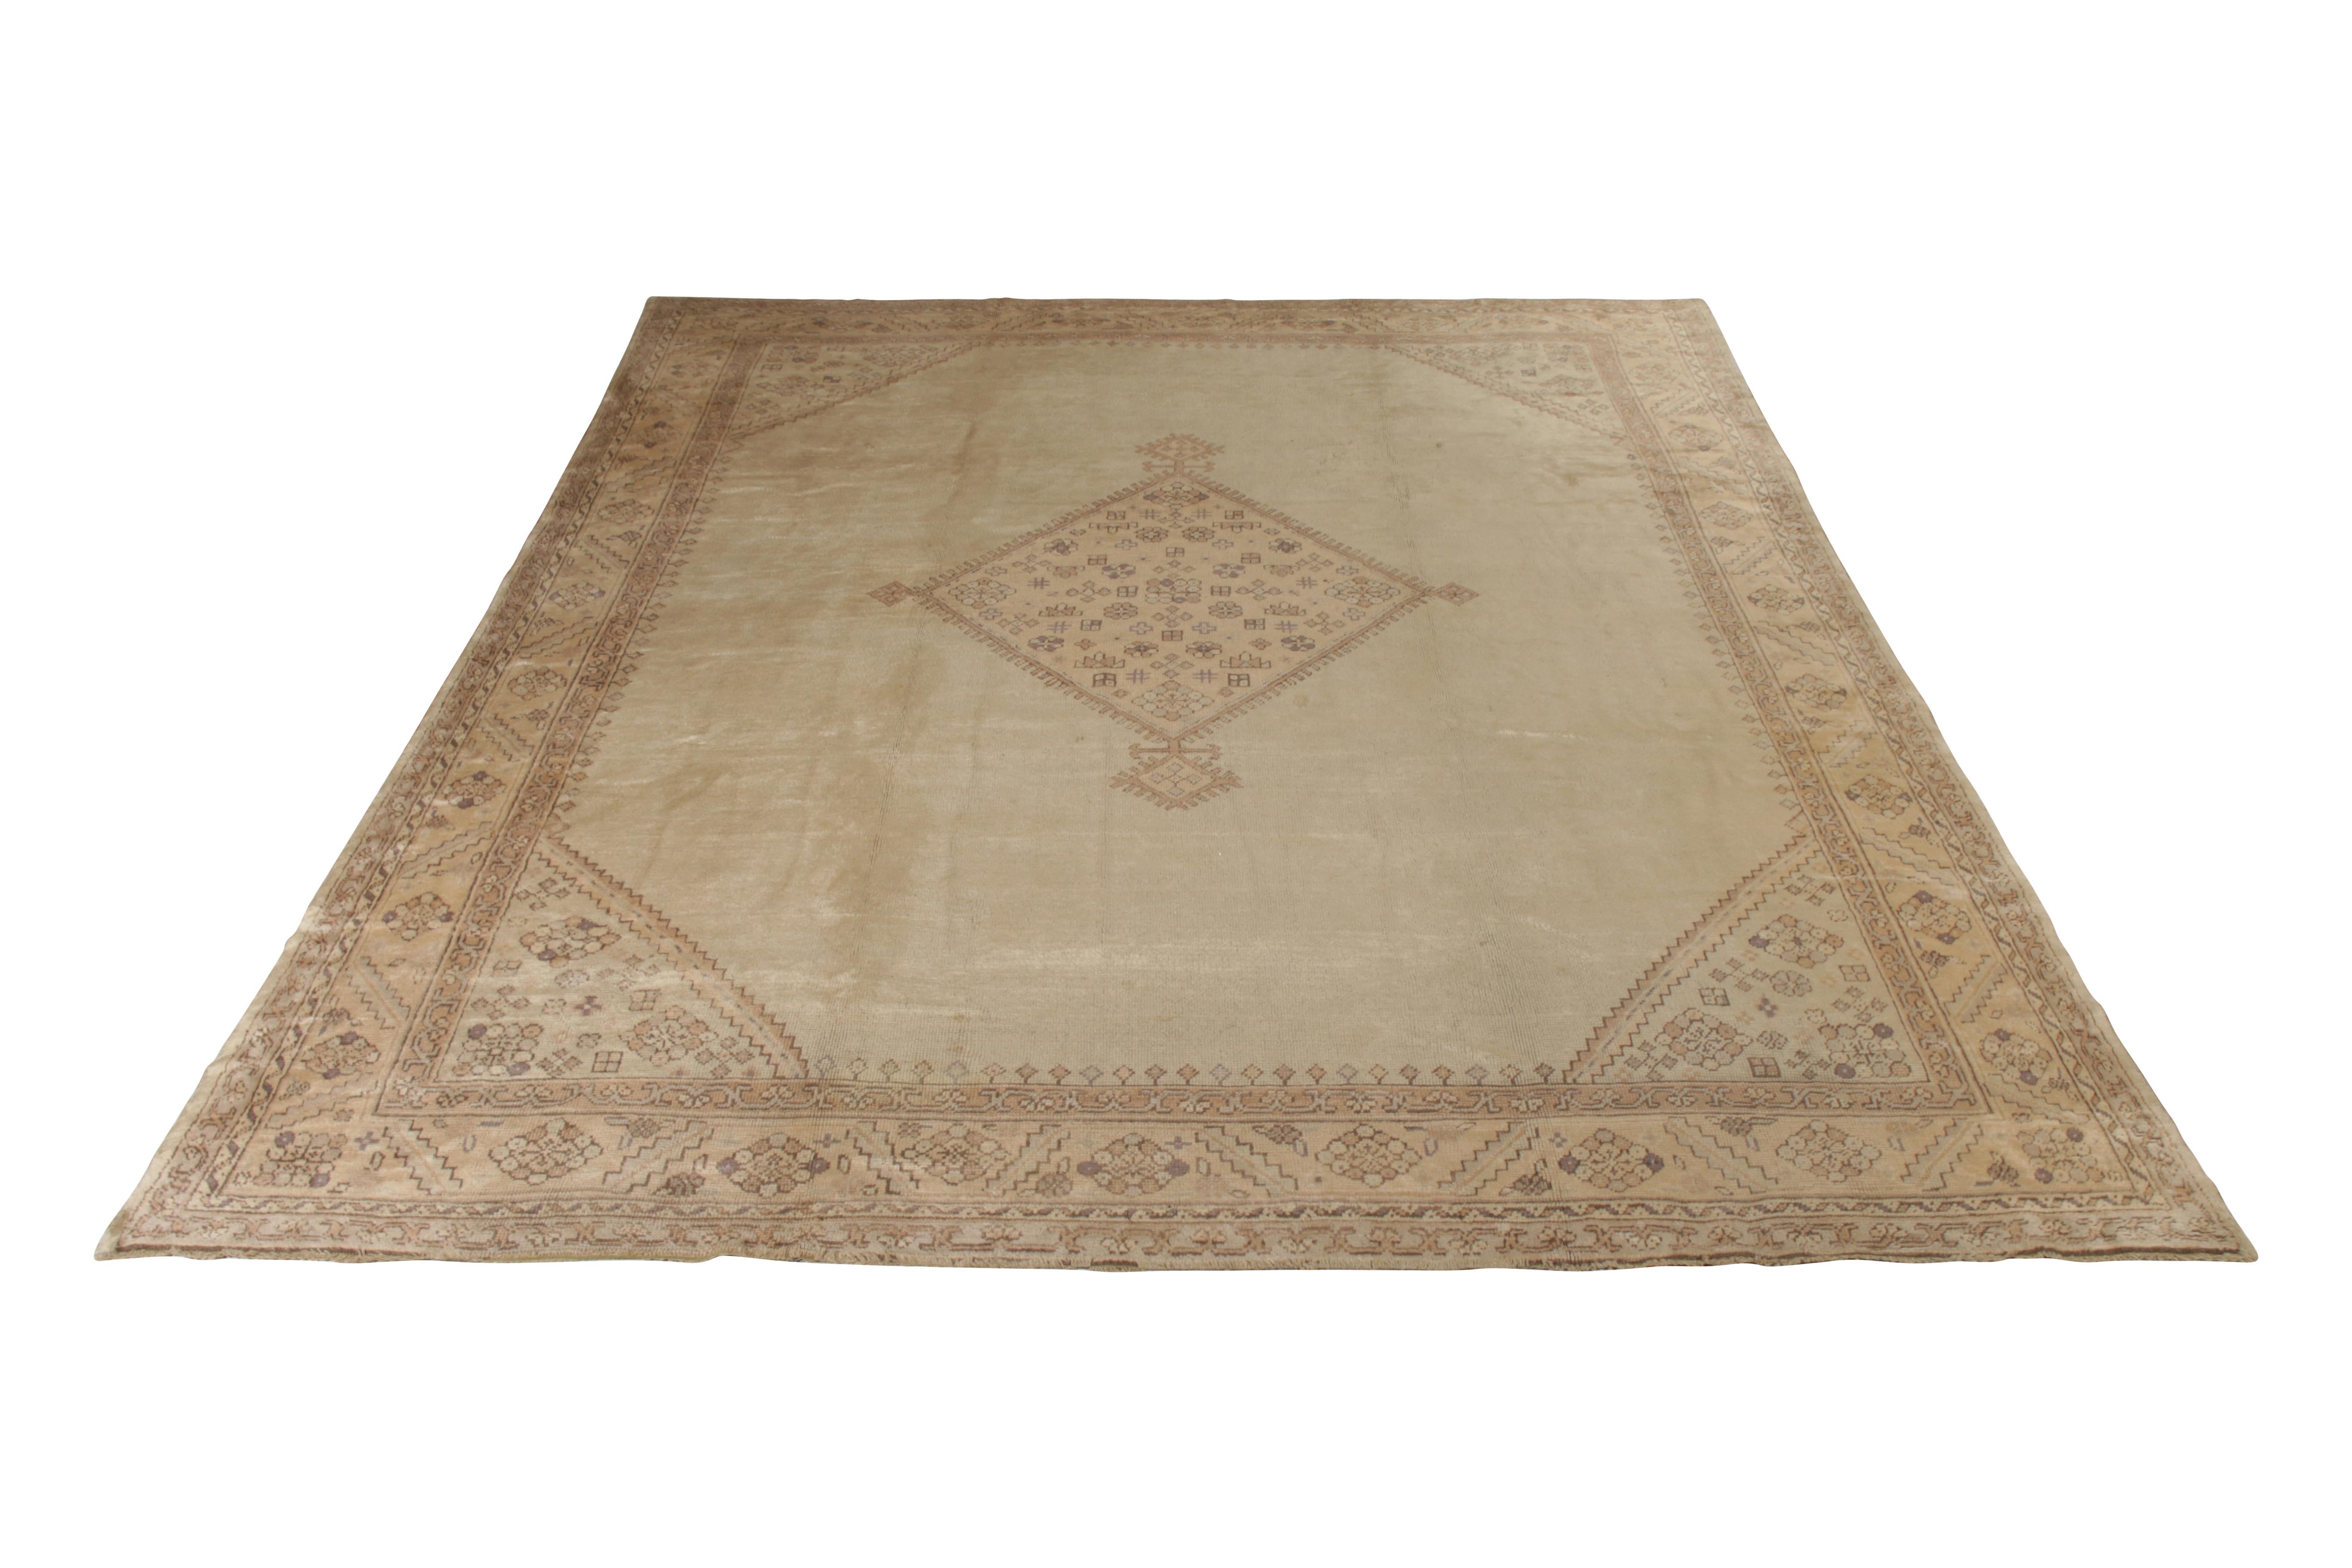 An antique 11x13 Oushak rug in beige, hand knotted in wool originating from Turkey circa 1890-1900. This particular antique Oushak rug plays a medallion pattern alongside subtly intriguing accents, exemplifying unique works of this lineage.